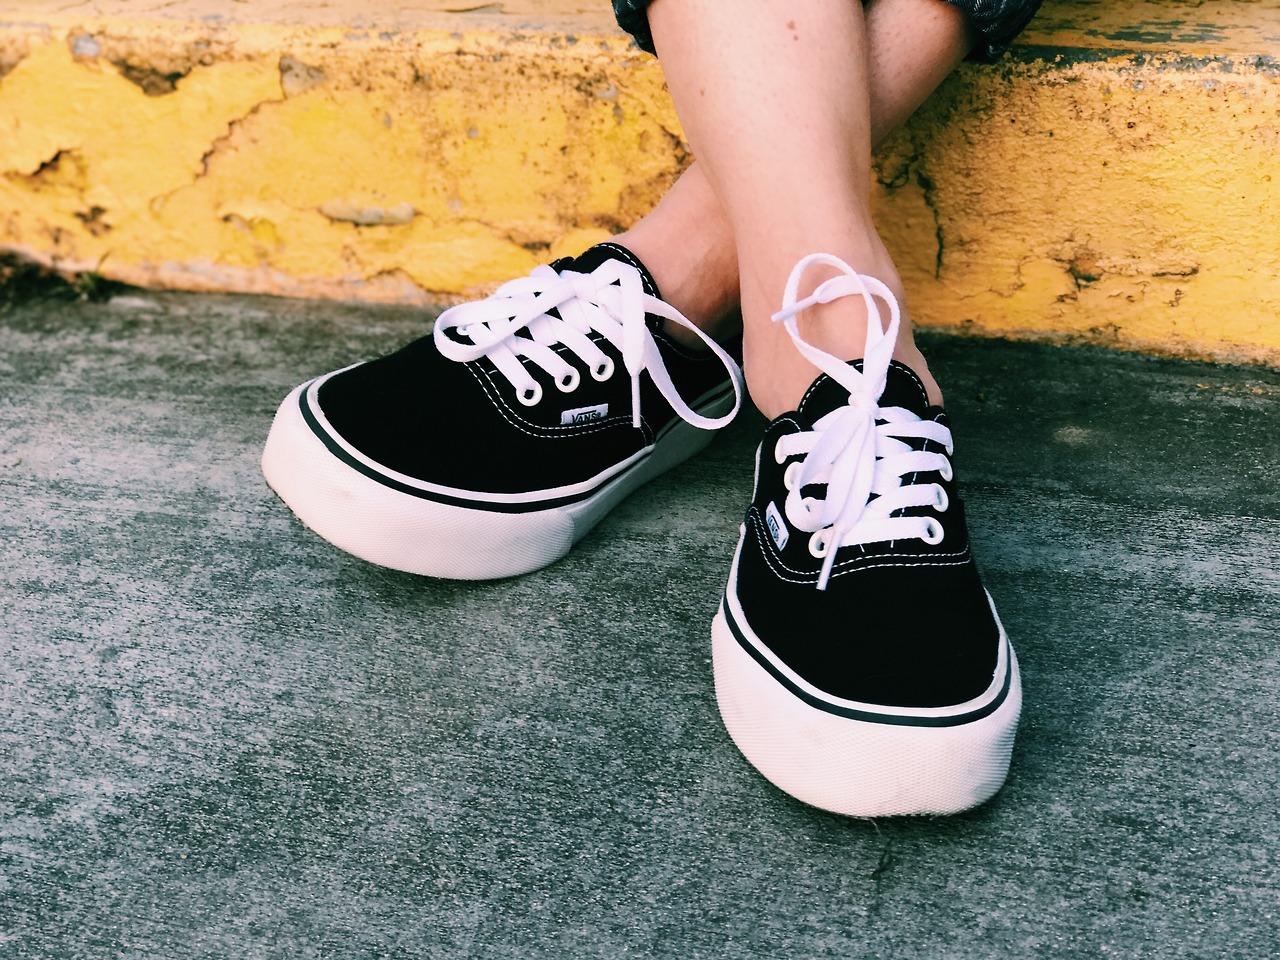 Who’s That Vans Girl?: @NouxNoux With a lust for... - Vans Girls